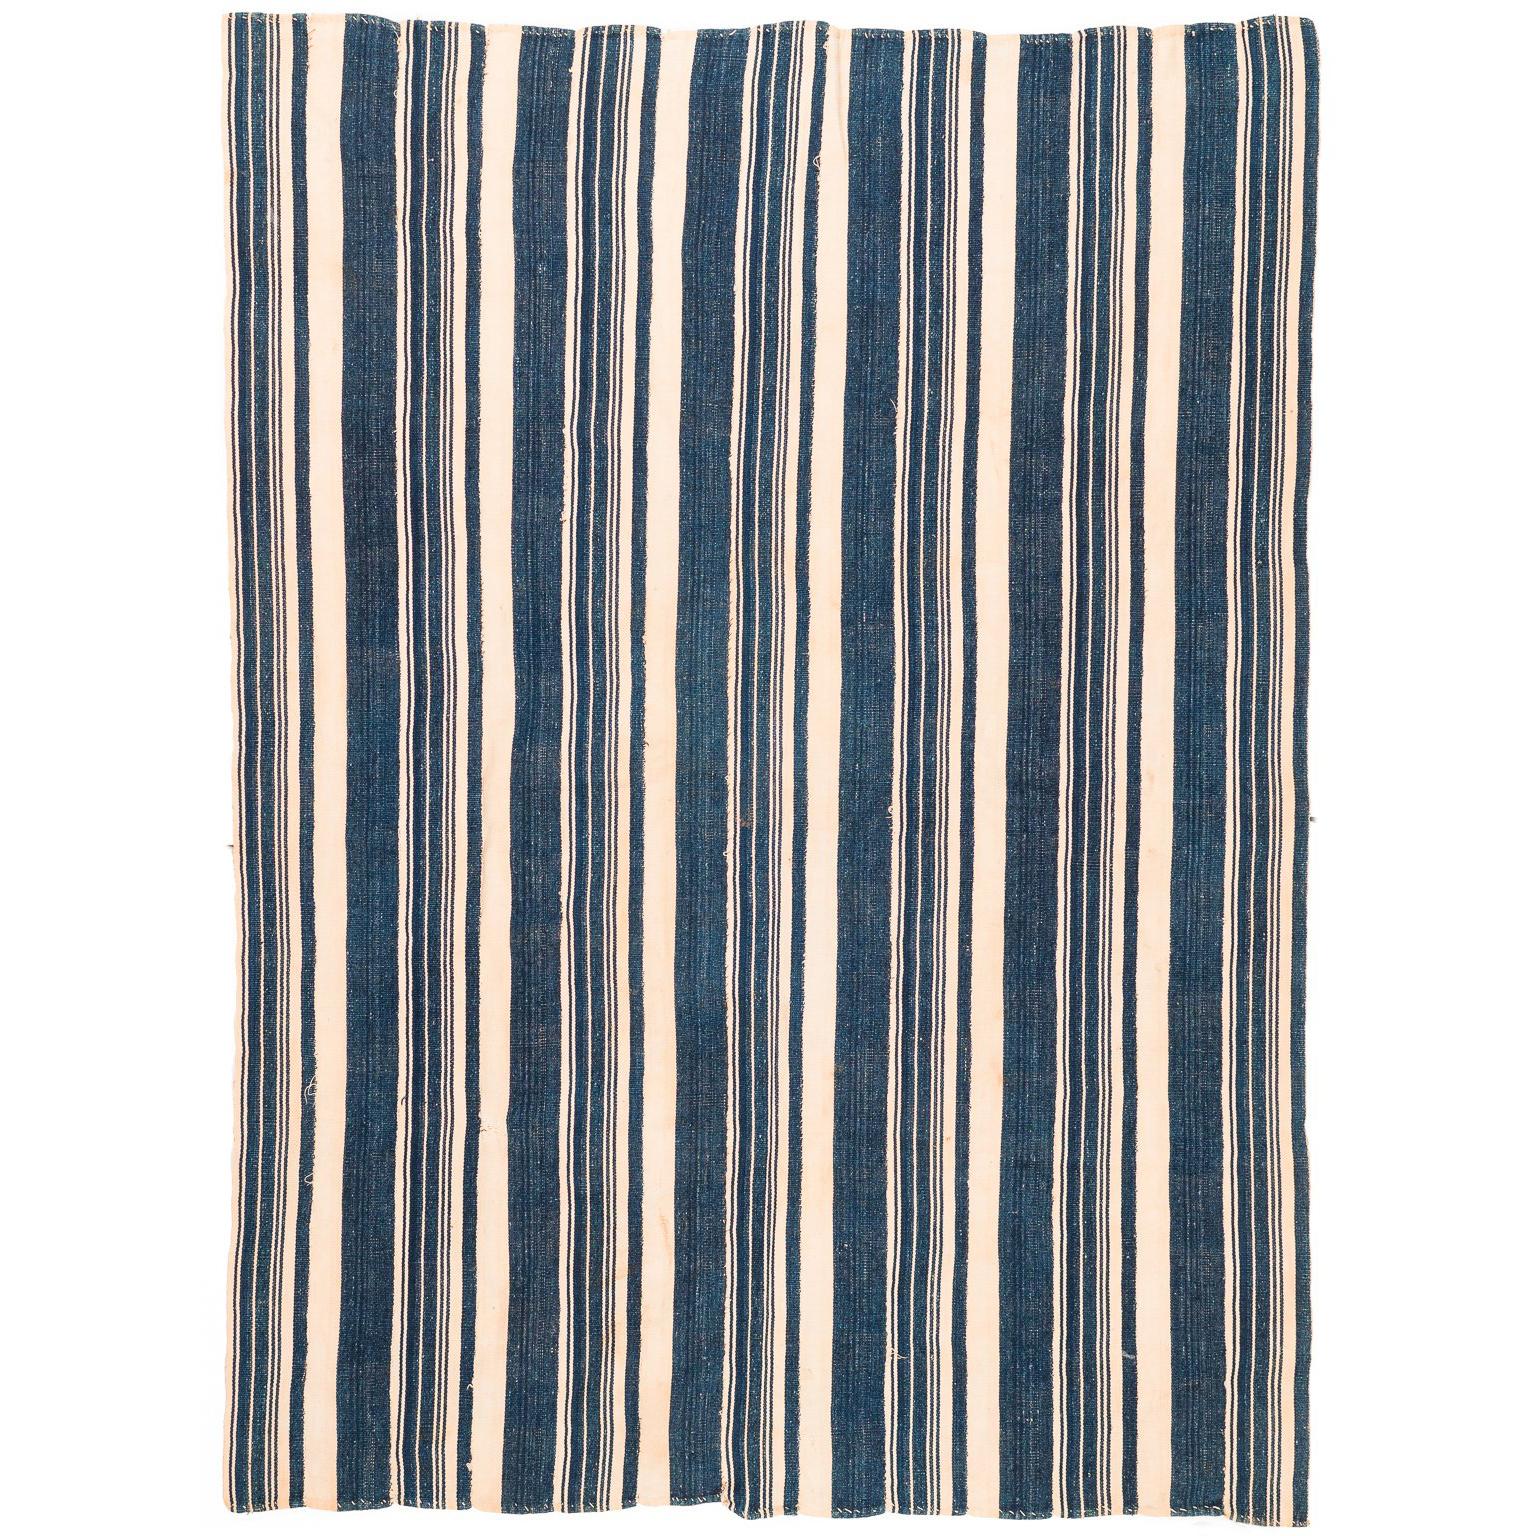 Vintage African Blue and White Striped Indigo Cotton Wrap For Sale